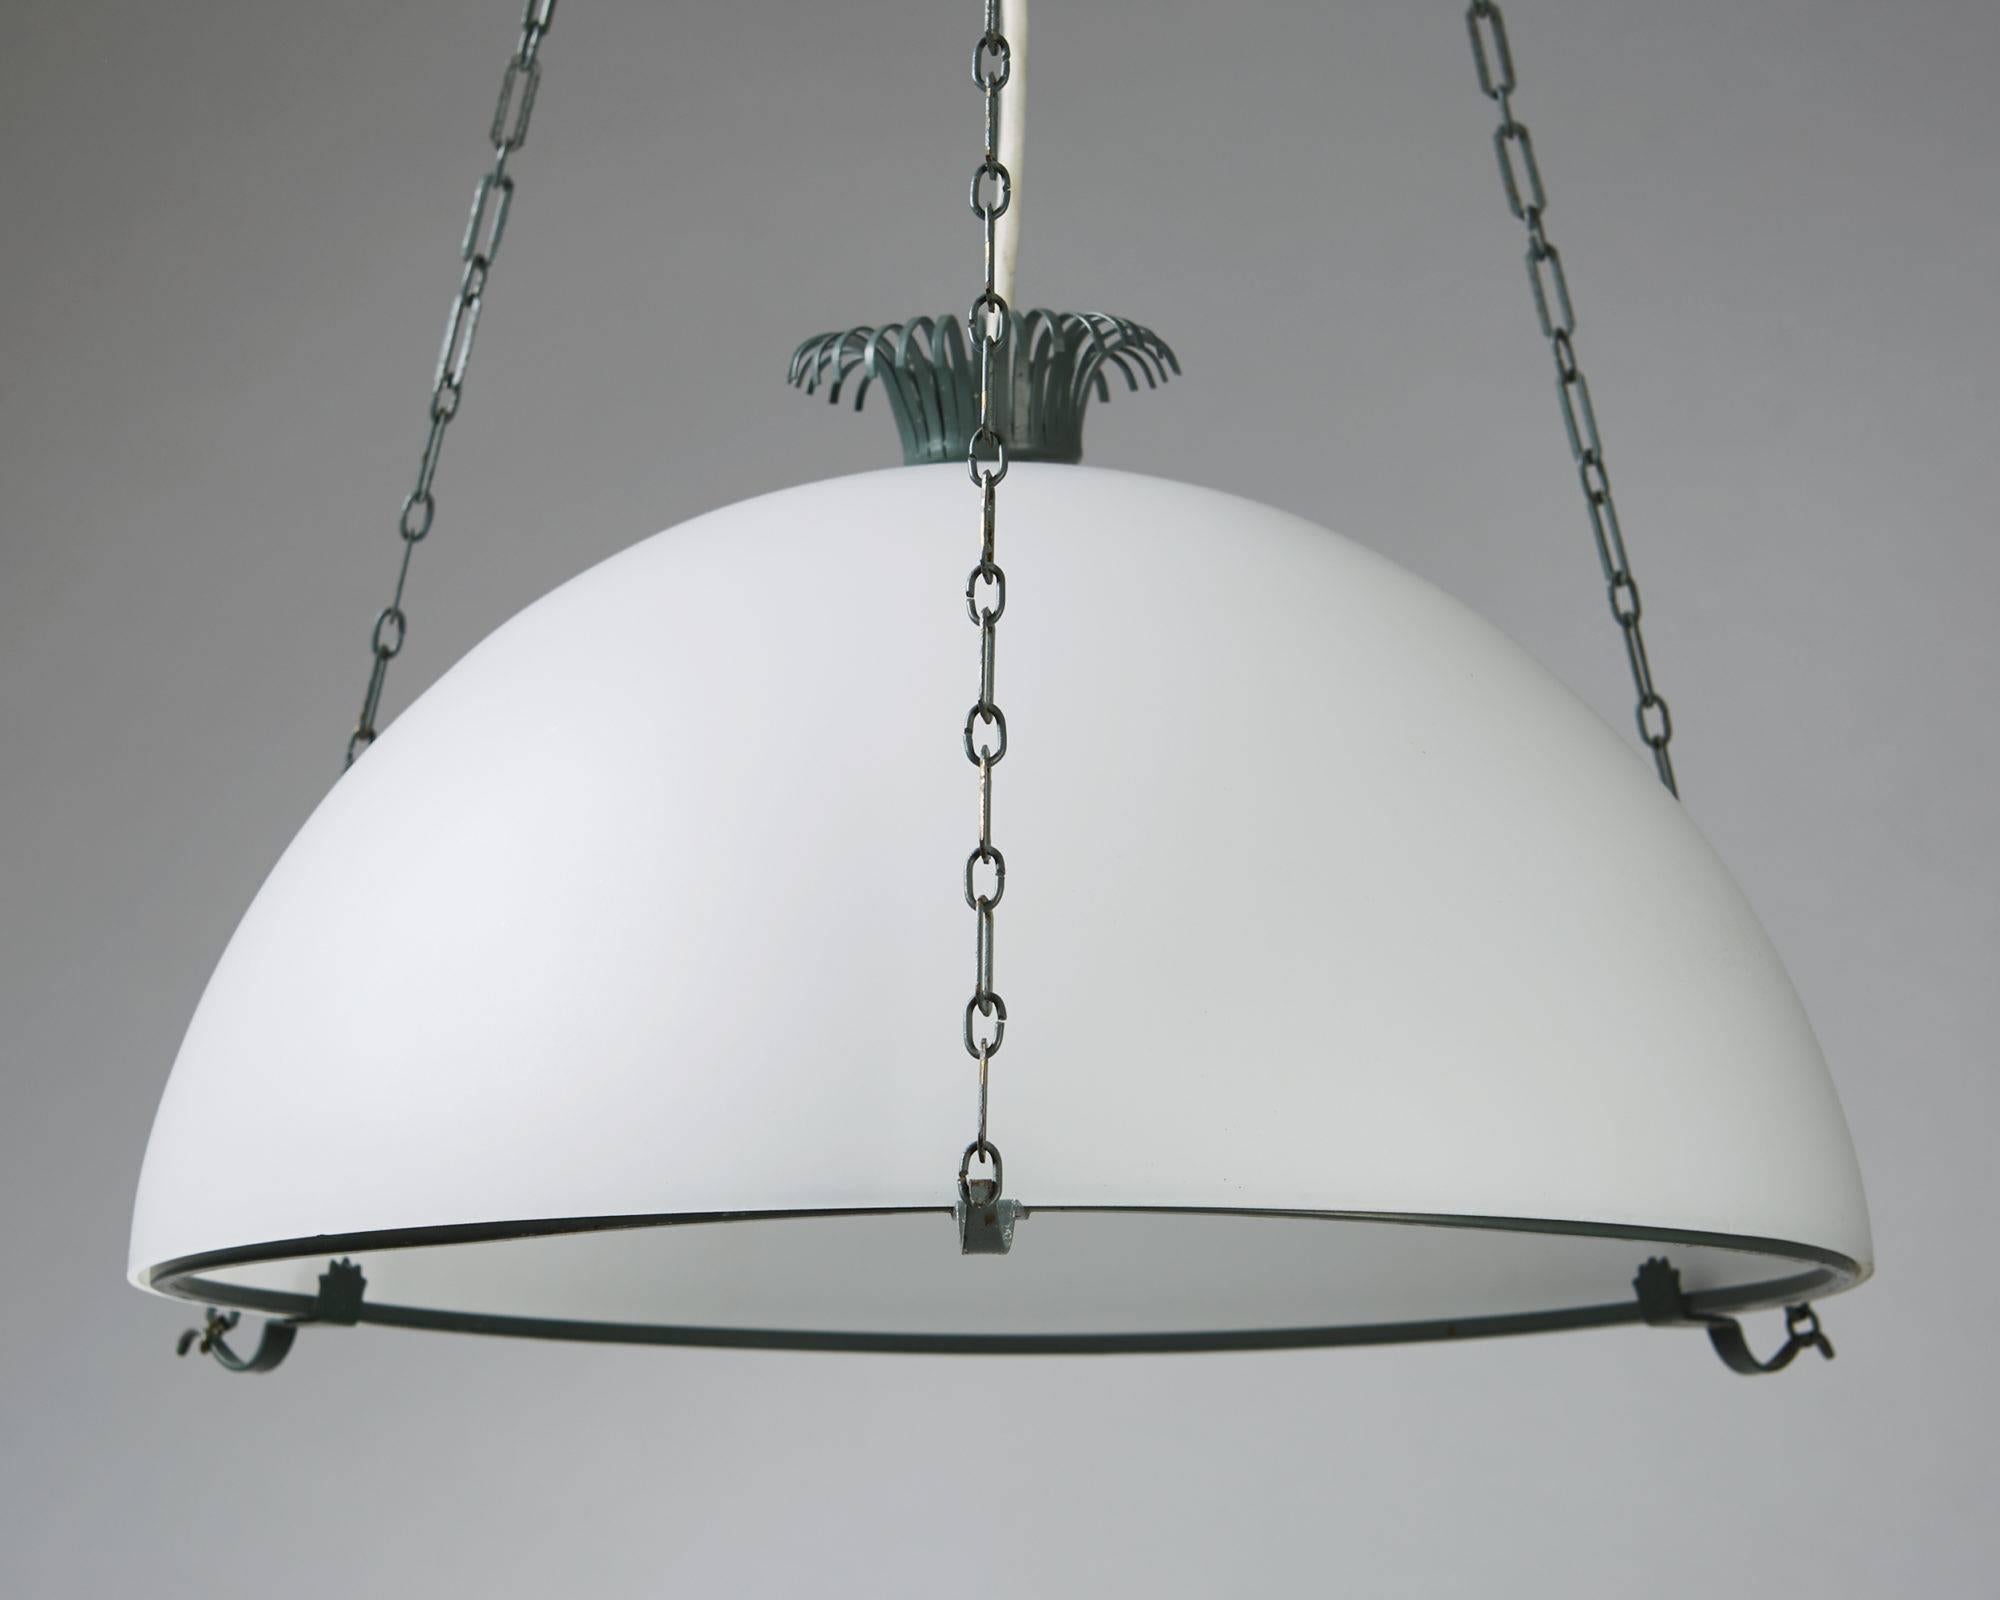 Ceiling lamp designed by Gunnar Asplund, 
Sweden, 1930s.
Glass and lacquered steel.

Early model with fine patina.

Measures: H 25 cm/ 10